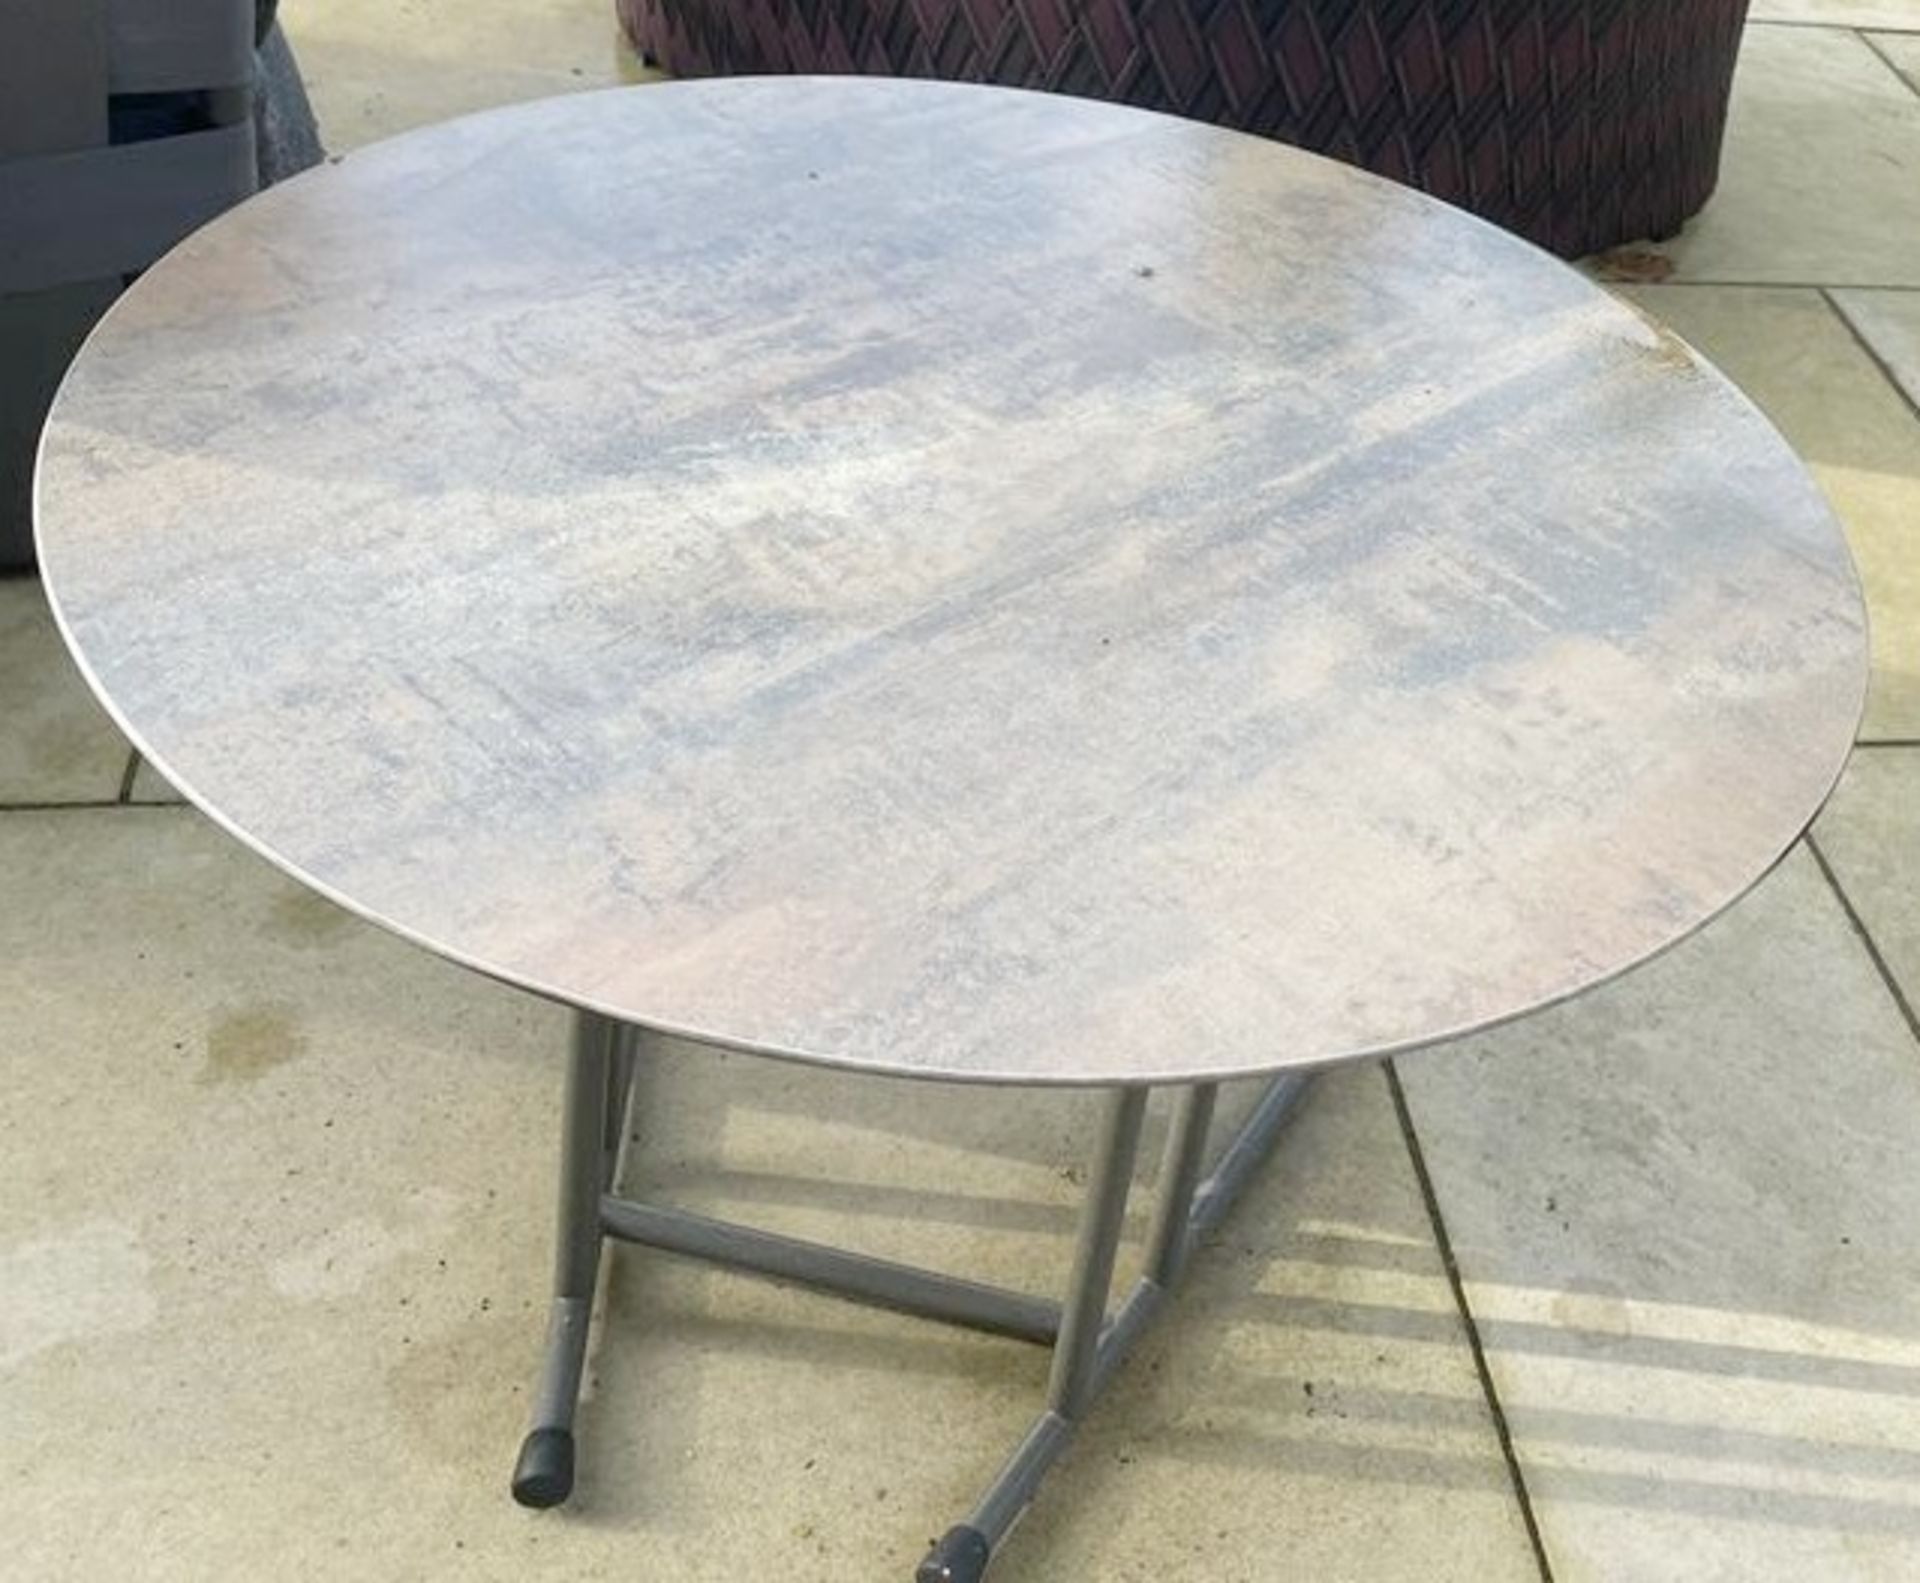 1 x Large Round Stone Topped Outdoor Coffee Table - From an Exclusive Hale Property - No VAT On